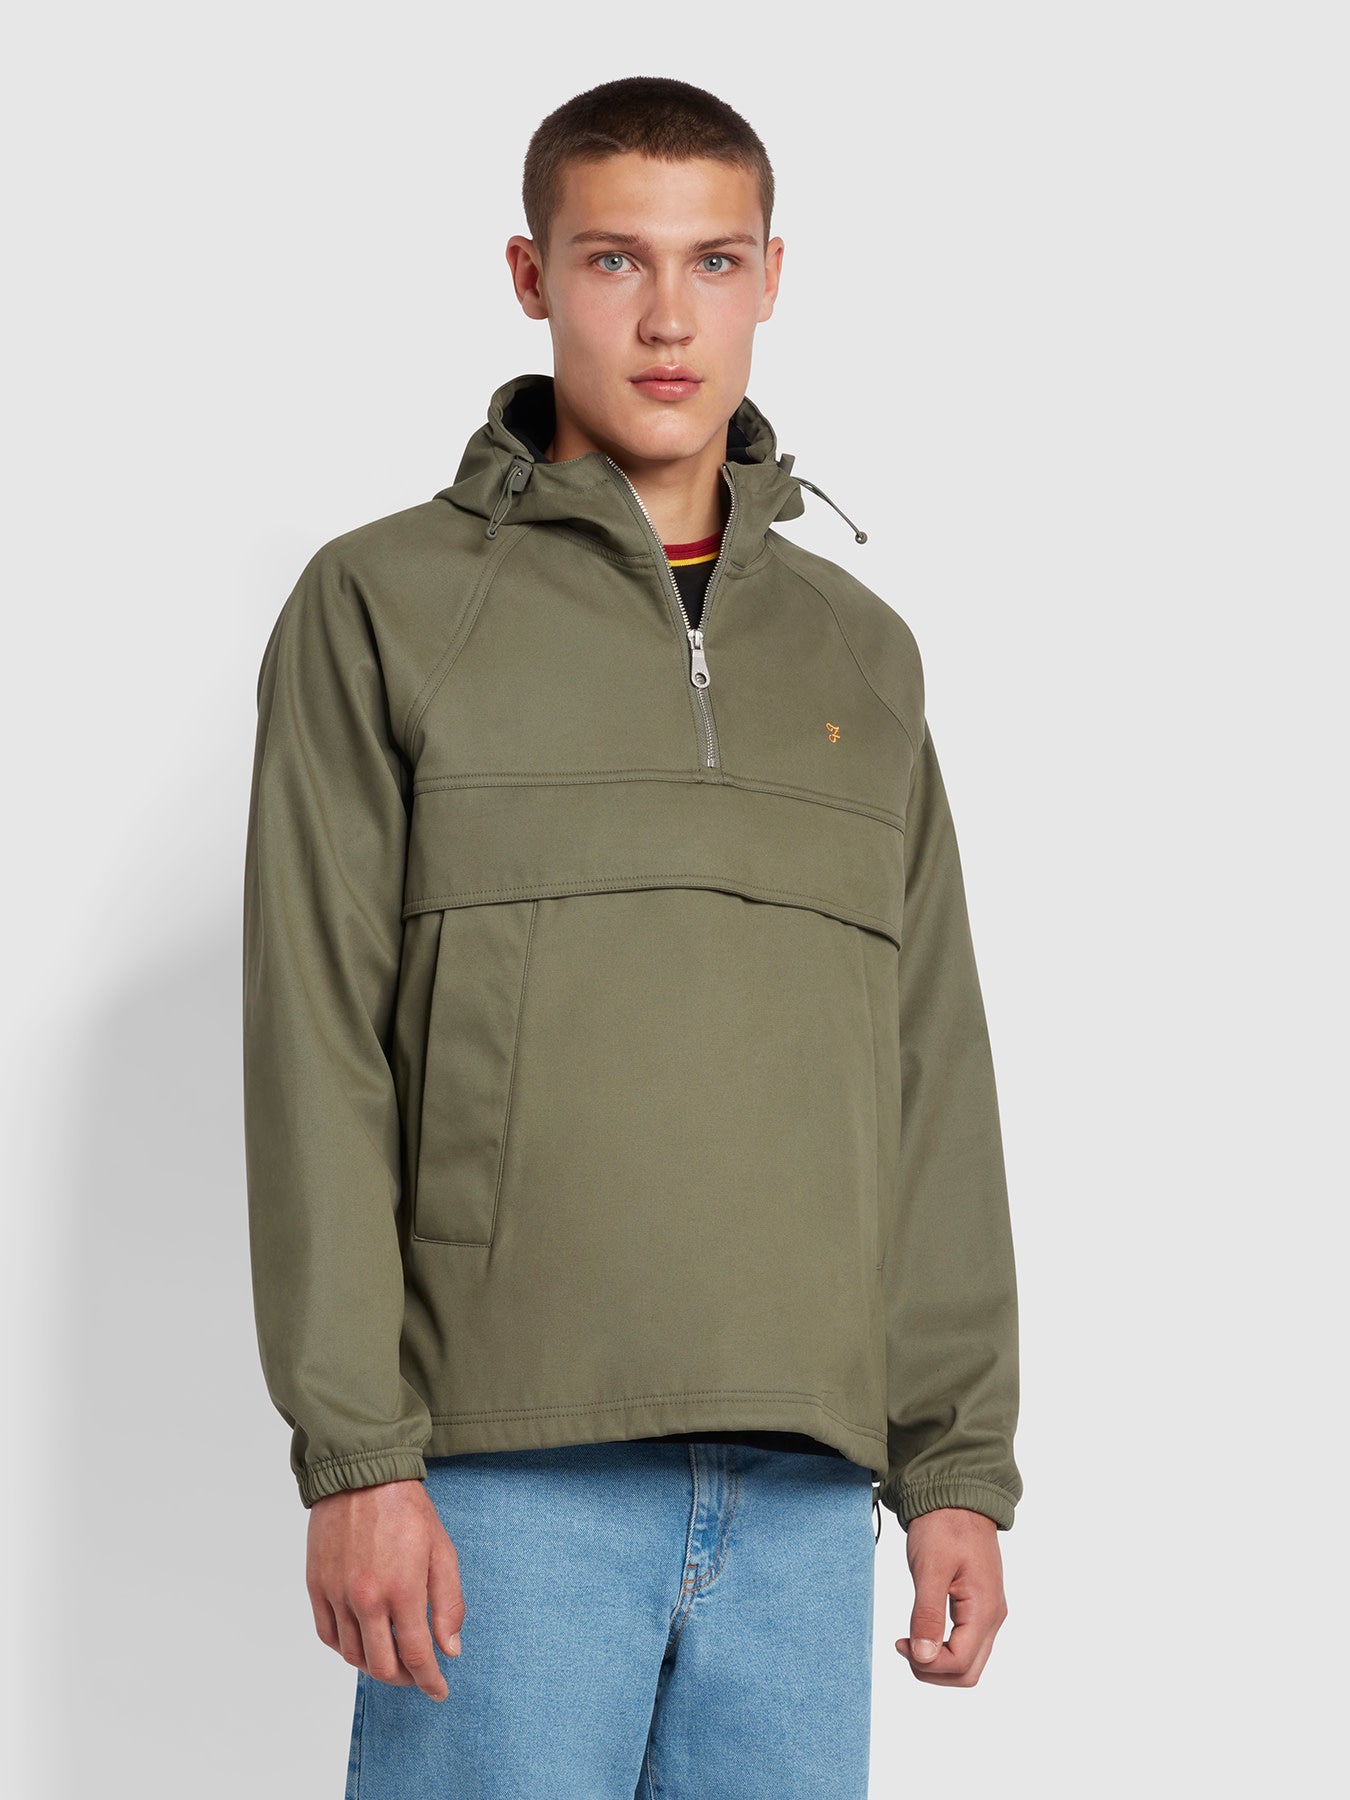 View Mike Overhead Quarter Zip Organic Cotton Jacket In Vintage Green information